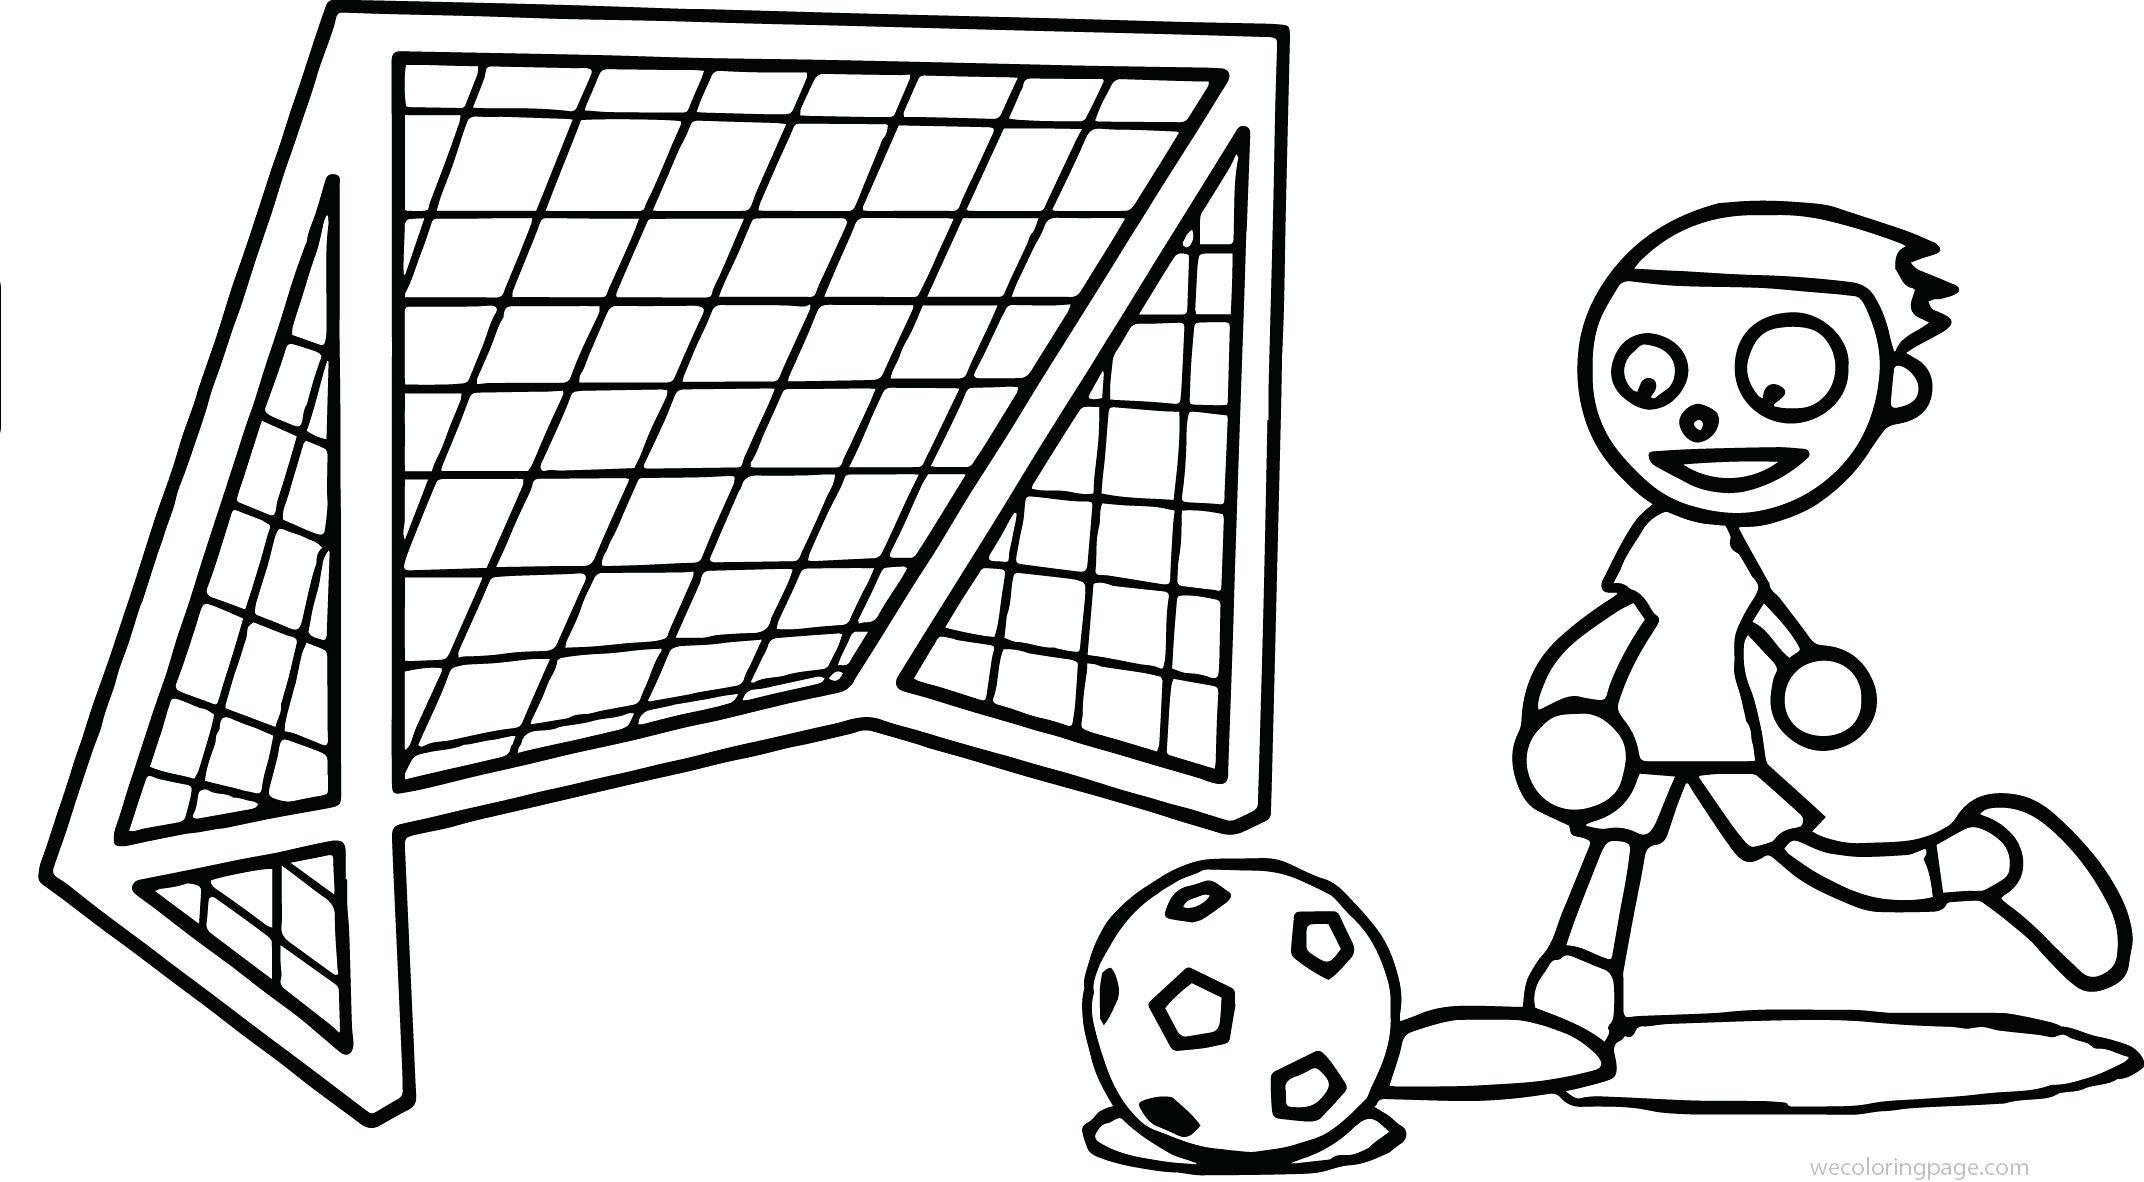 Best How To Draw A Soccer Goal  Learn more here 